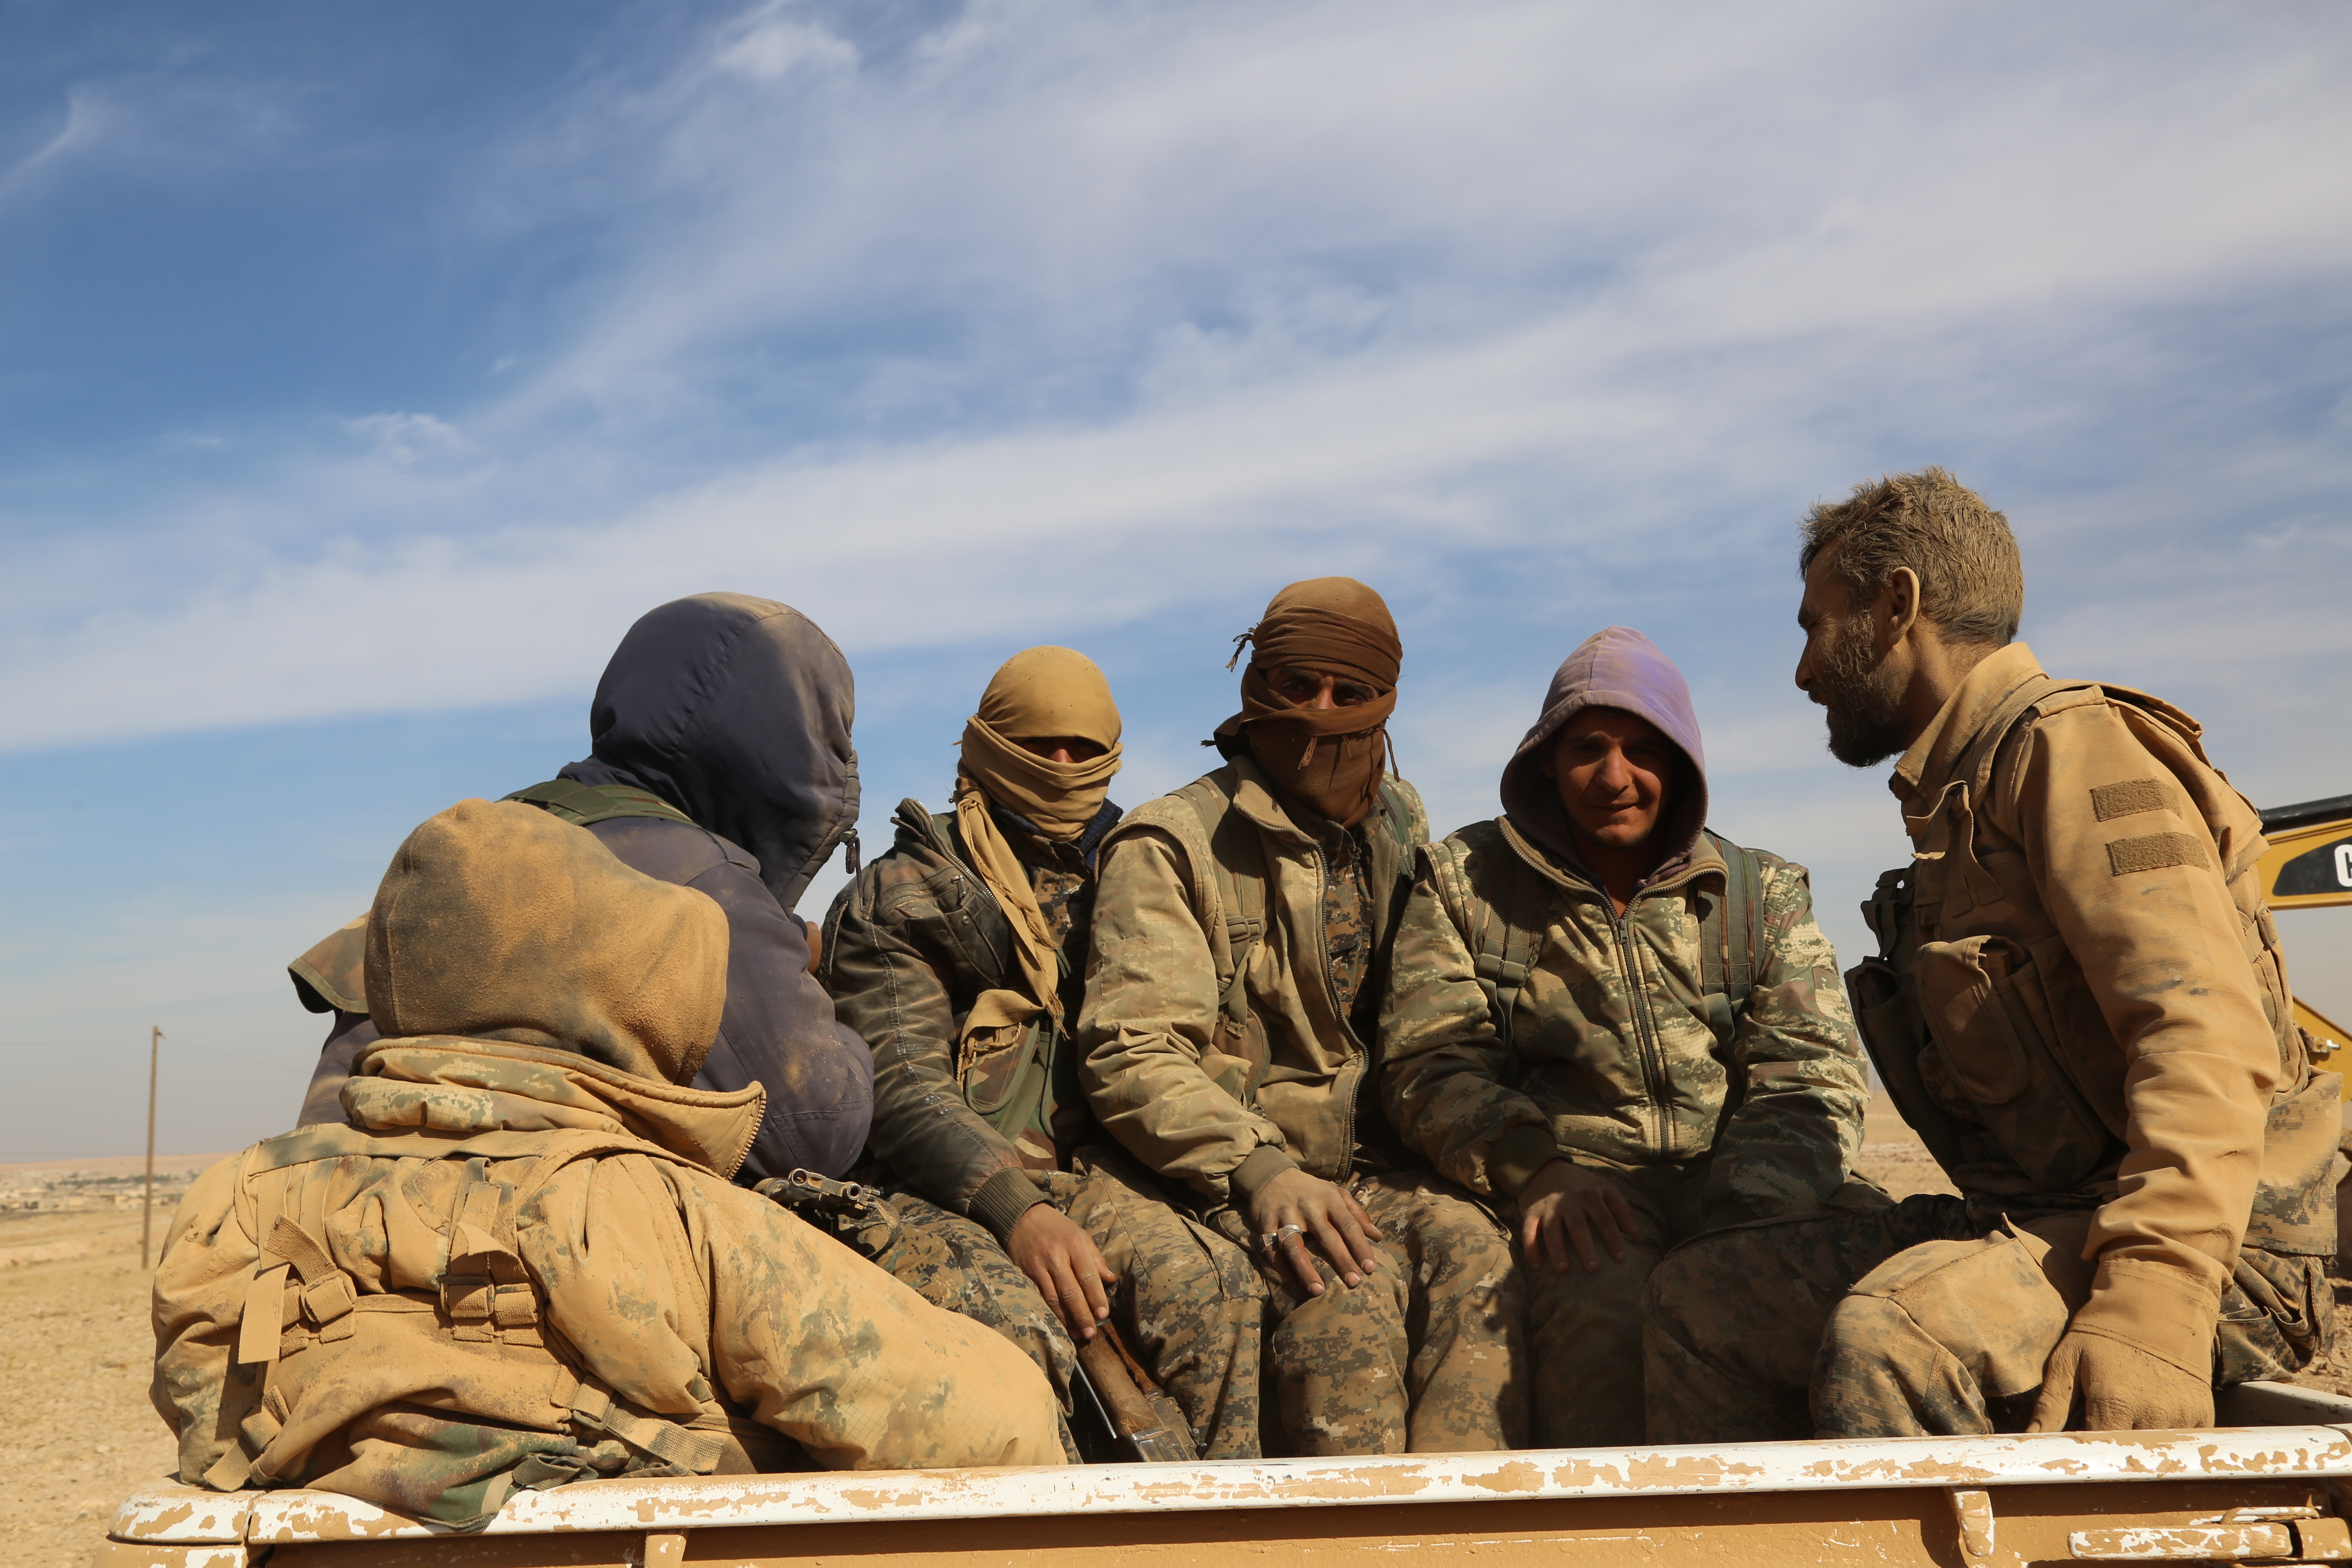 Syrian Democratic Forces (SDF), a US-backed Kurdish-Arab alliance, sit on the back of a pick-up truck in the village of Abu al-Ilaj, near the Syrian town of Ain Issa, some 50 kilometres (30 miles) north of Raqa, the Islamic State group (IS)'s de facto Syrian capital, after the SDF alliance launched an offencive to retake the IS stronghold, on November 7, 2016. / AFP PHOTO / DELIL SOULEIMAN